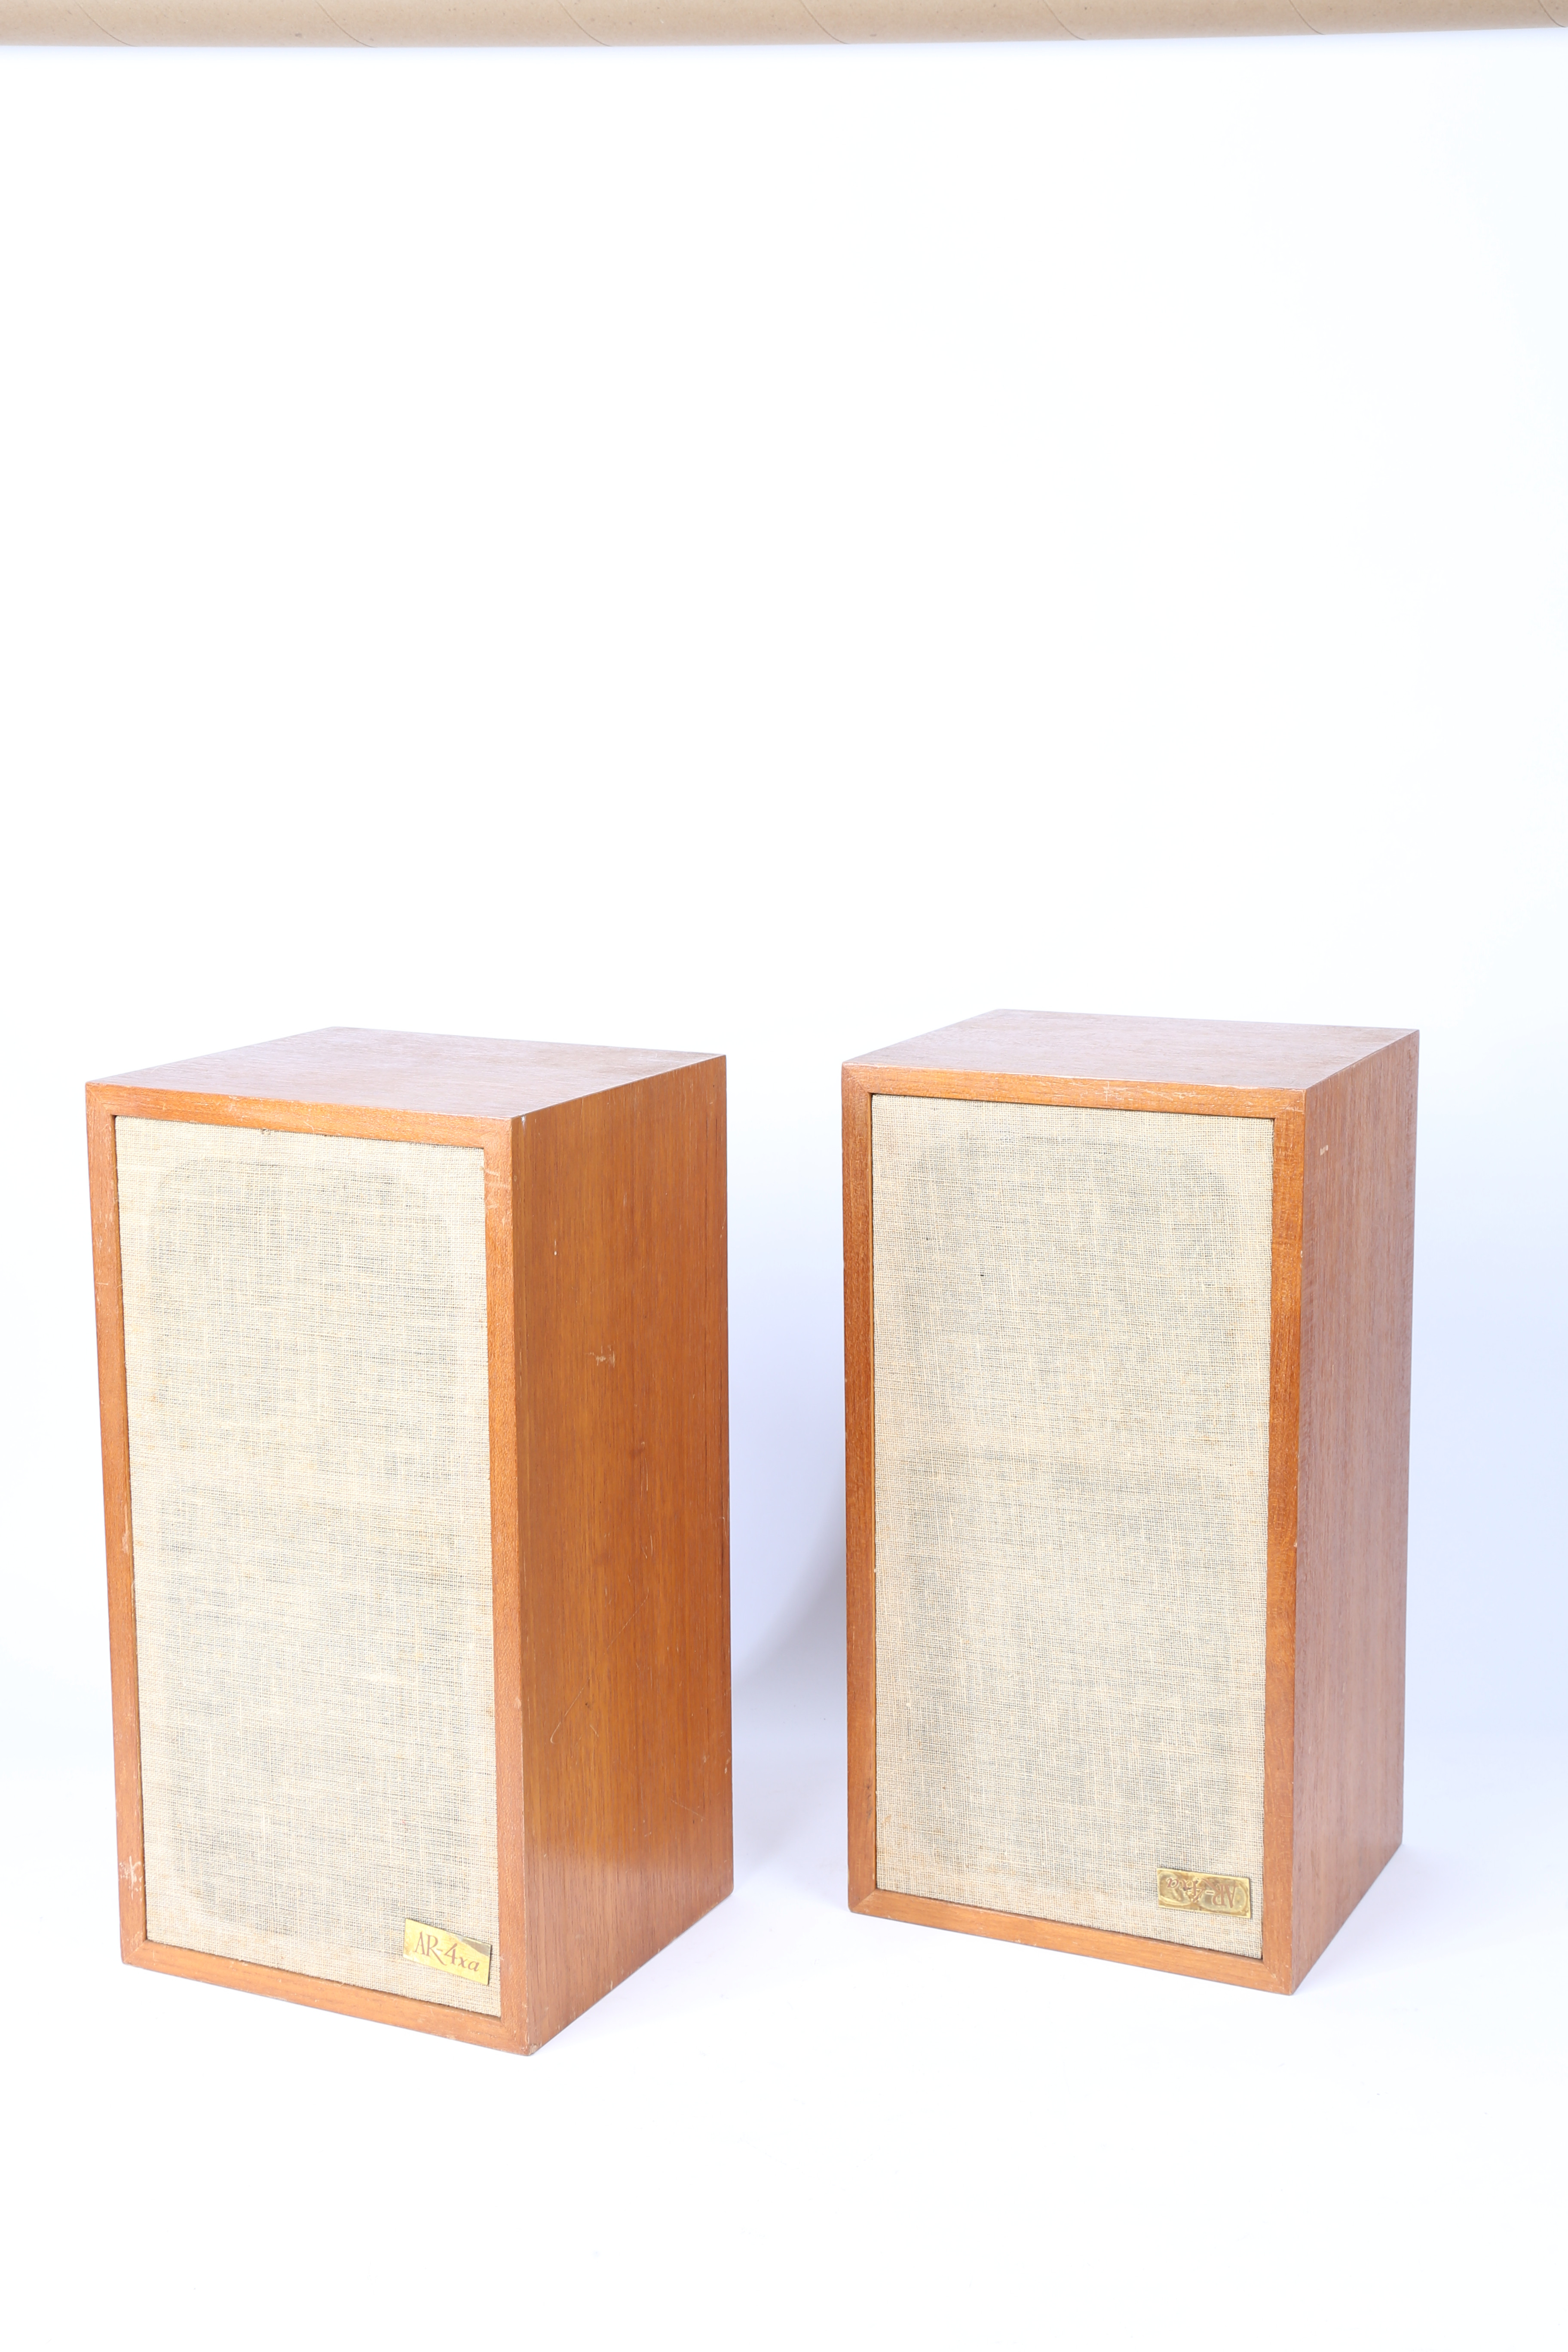 A PAIR OF ACOUSTIC SOLUTIONS AR-4XA SPEAKERS. - Image 5 of 6